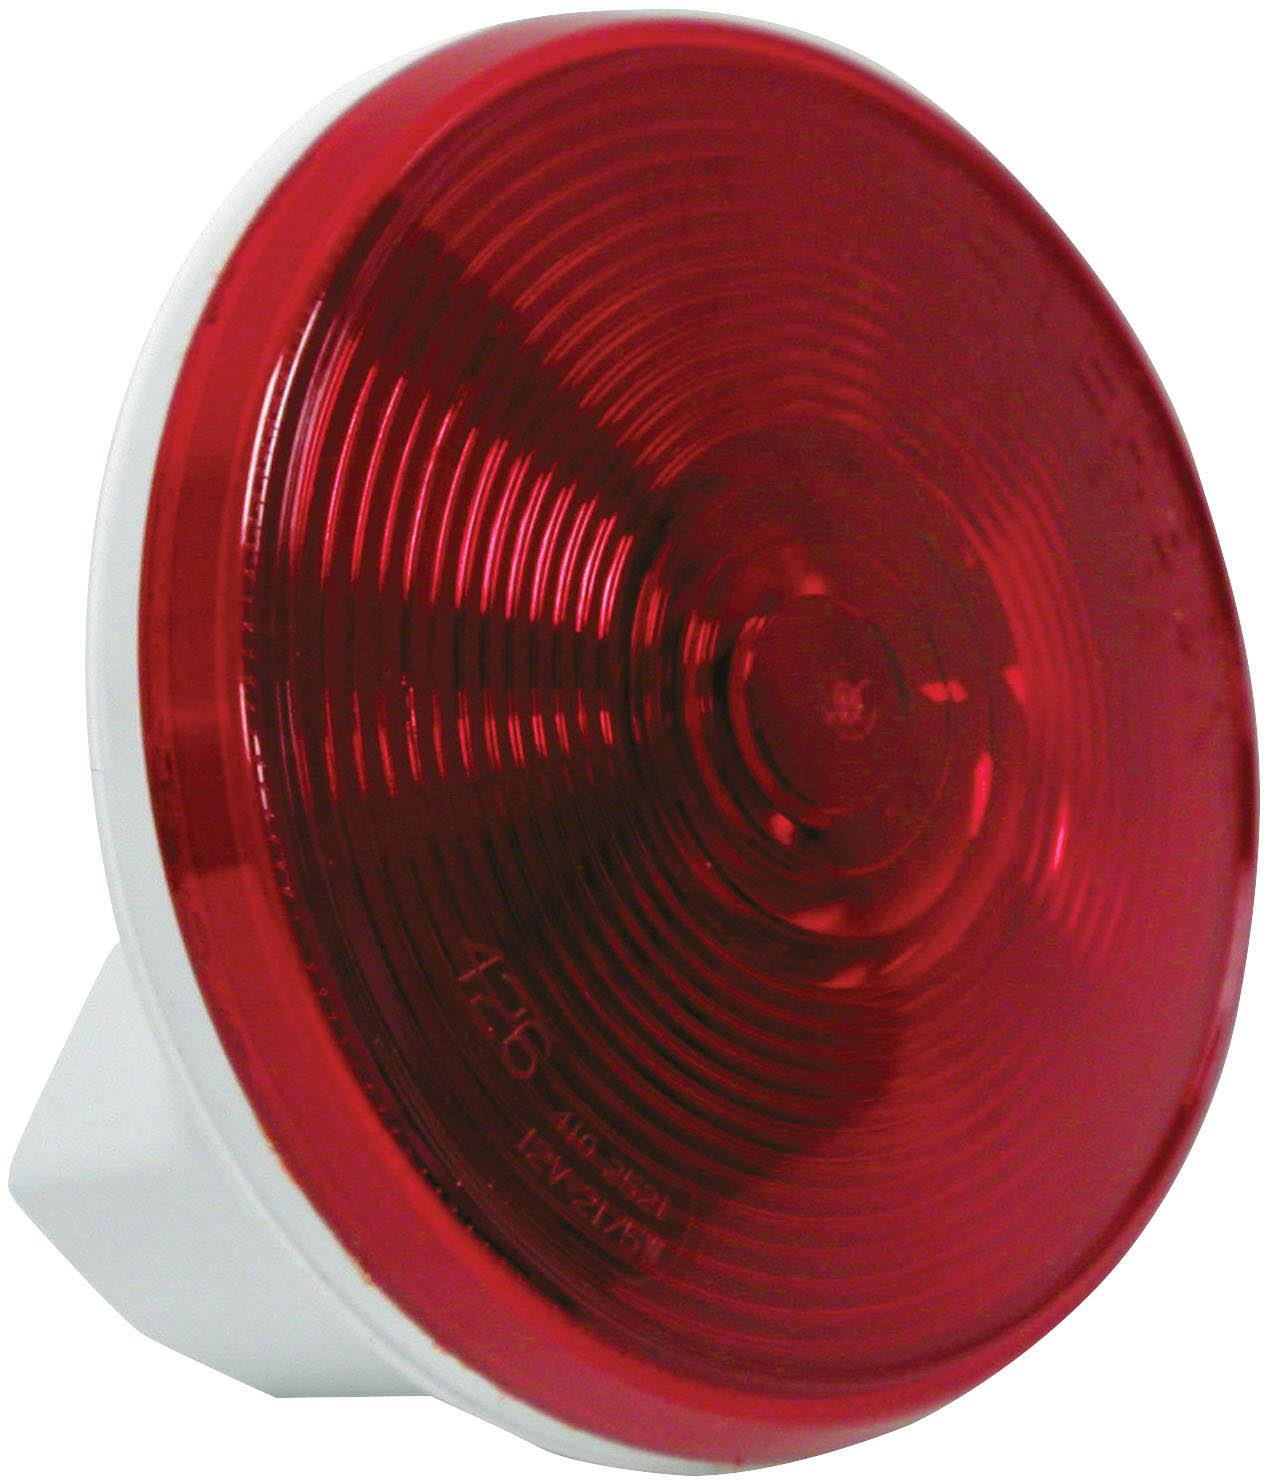 Incandescent Stop/Turn/Tail, Round, 4", red, bulk pack (Pack of 50)